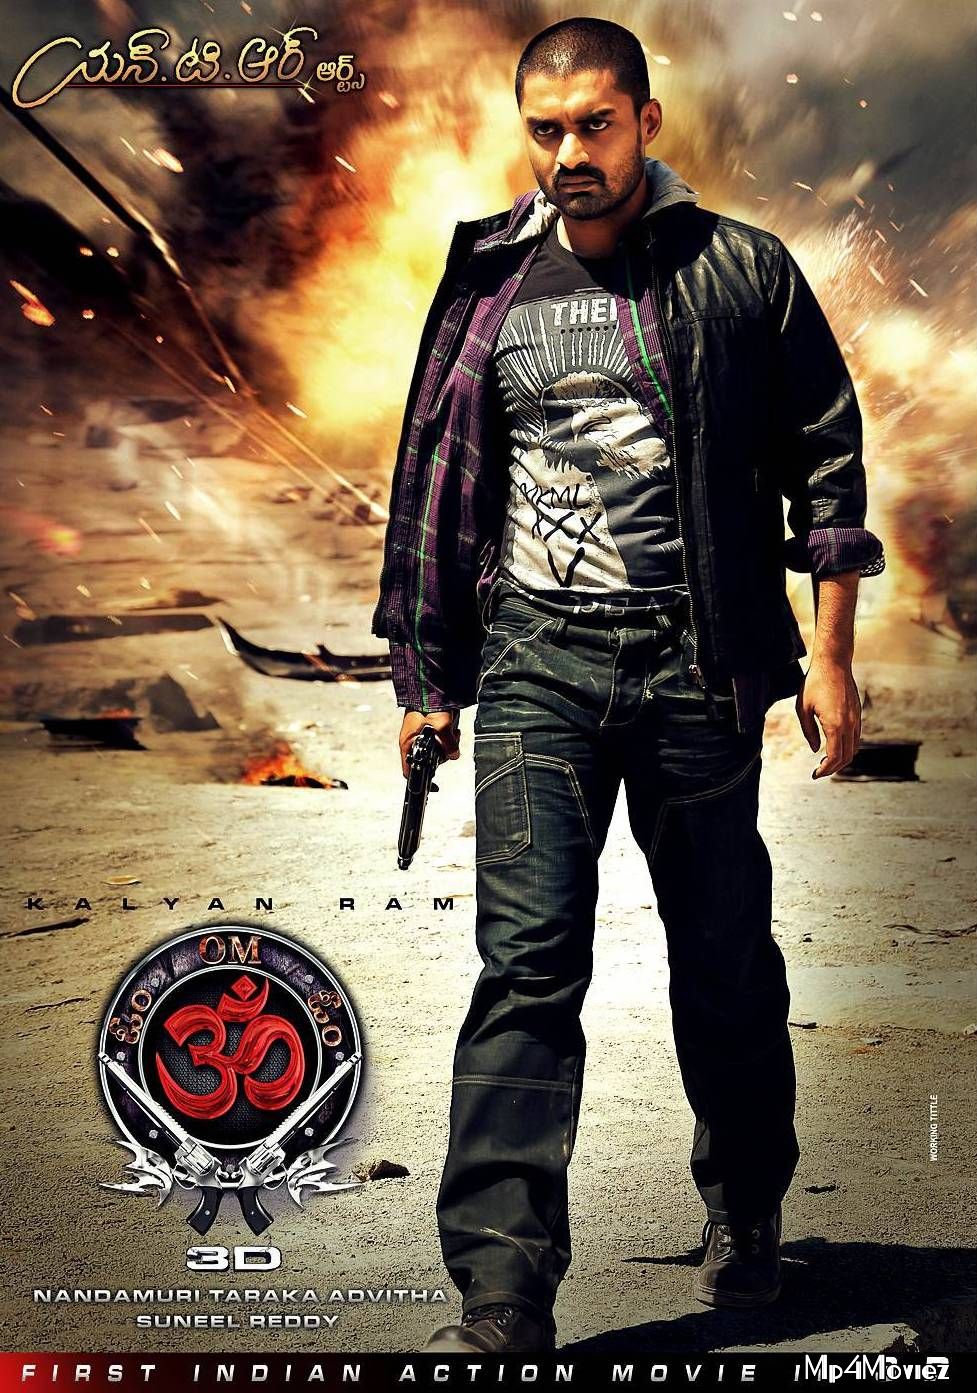 OM 3D (2021) Hindi Dubbed Movie download full movie